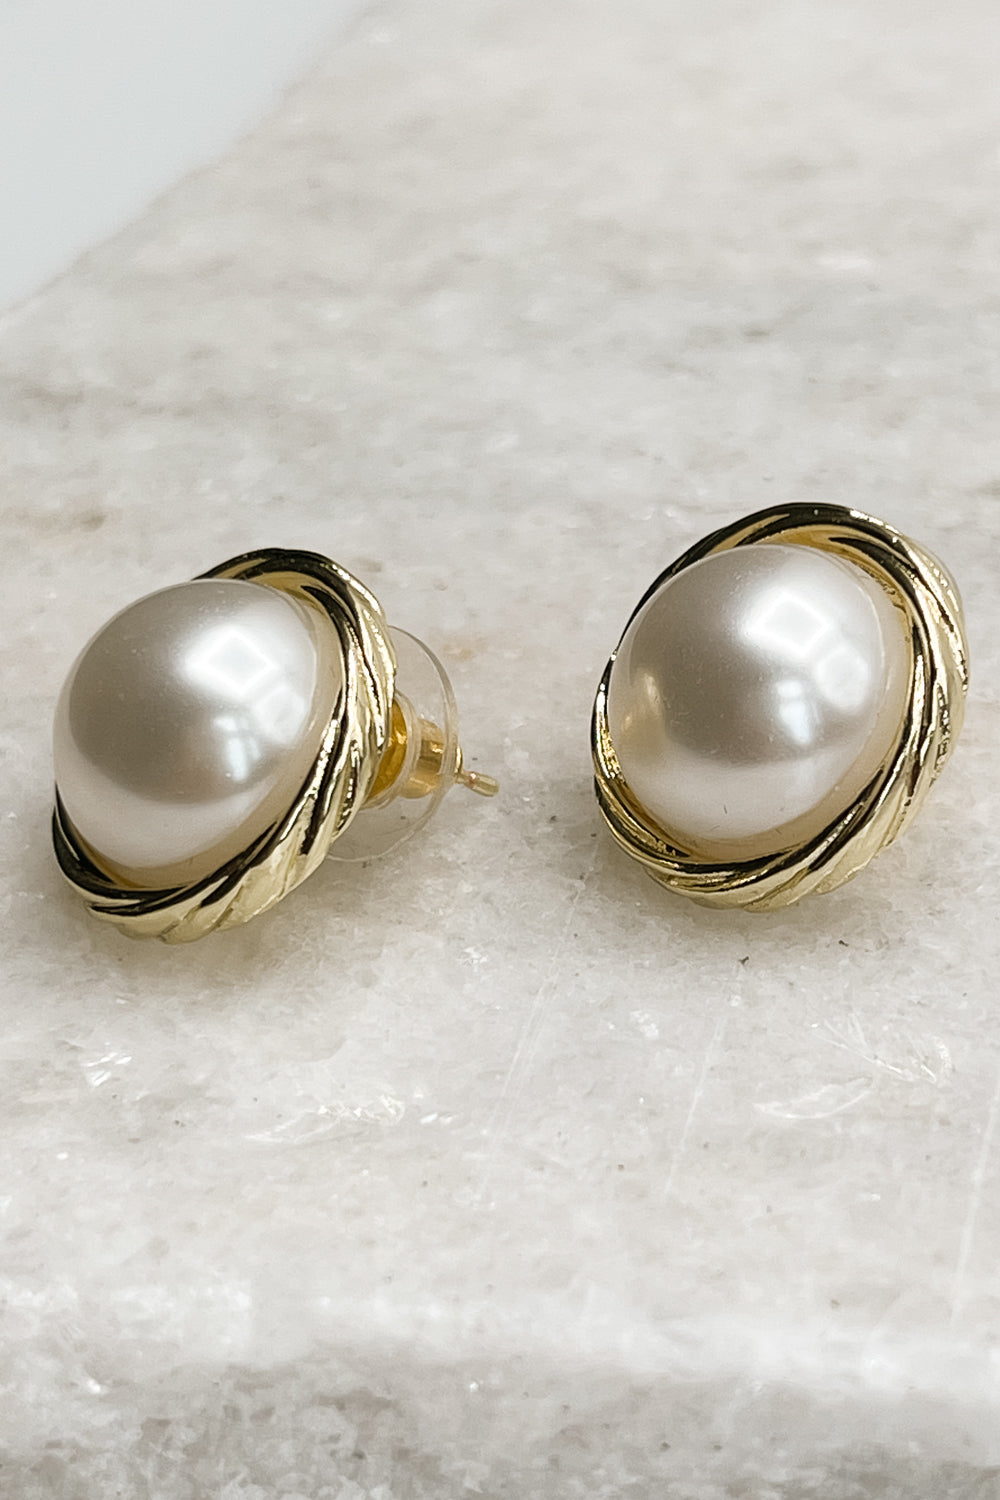 Close up half side view of Camden Pearl Stud Earrings, pearl studs wrapped in gold.